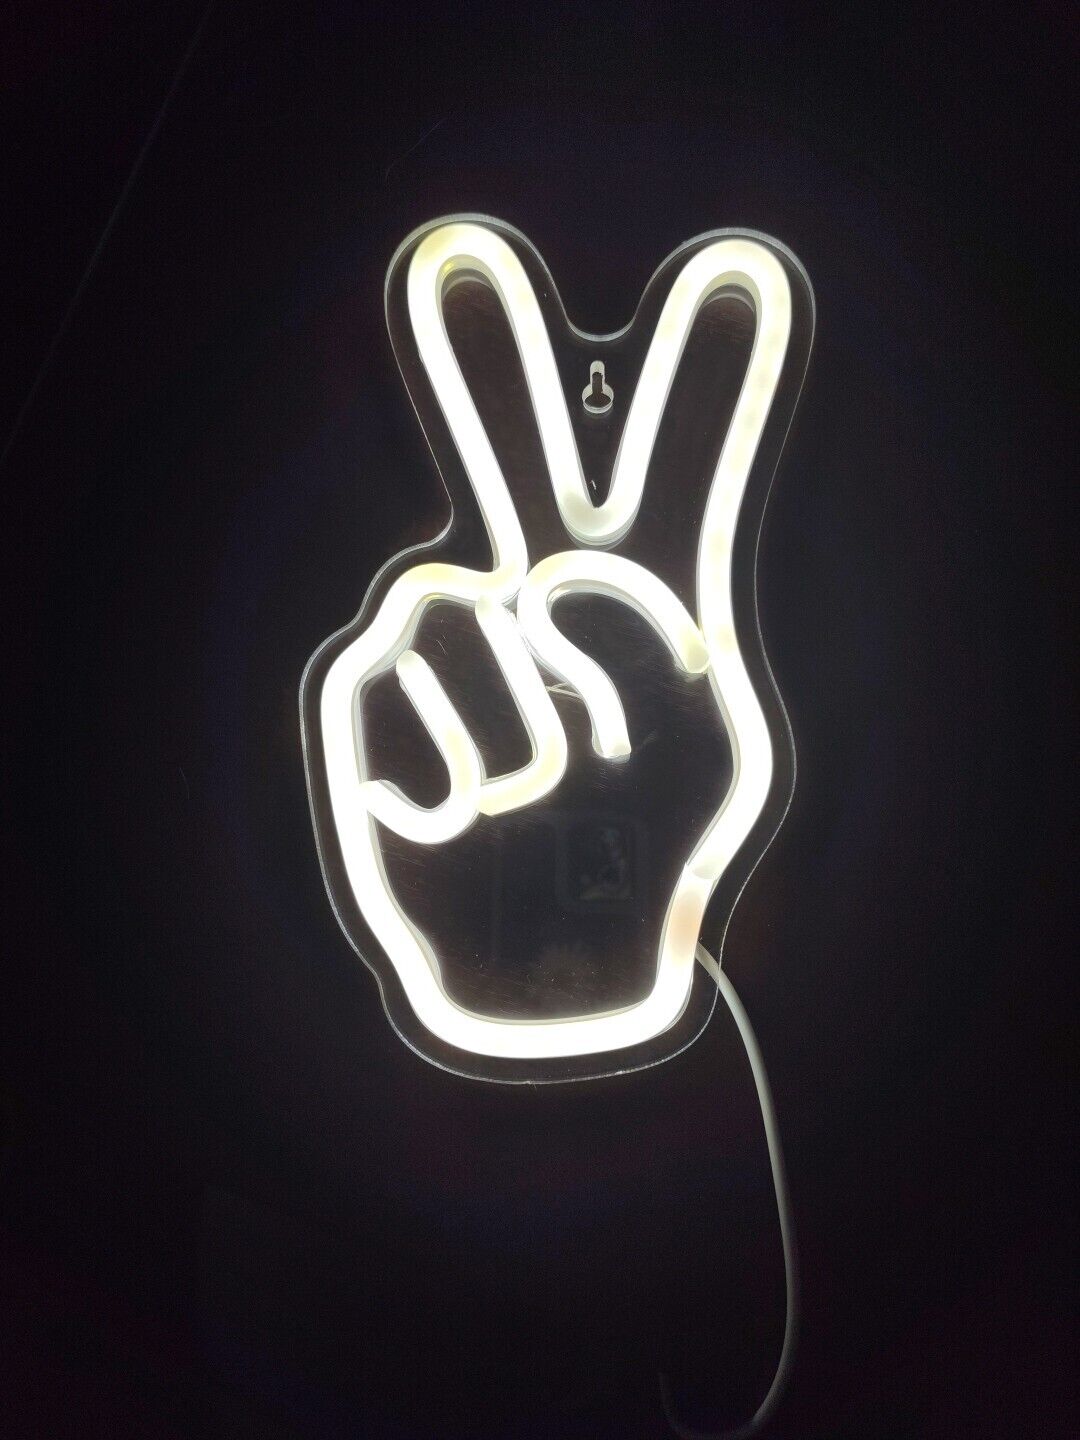 LED Neon Back Light Hand Peace Sign Wall Hanging Light Plug in USB Cord